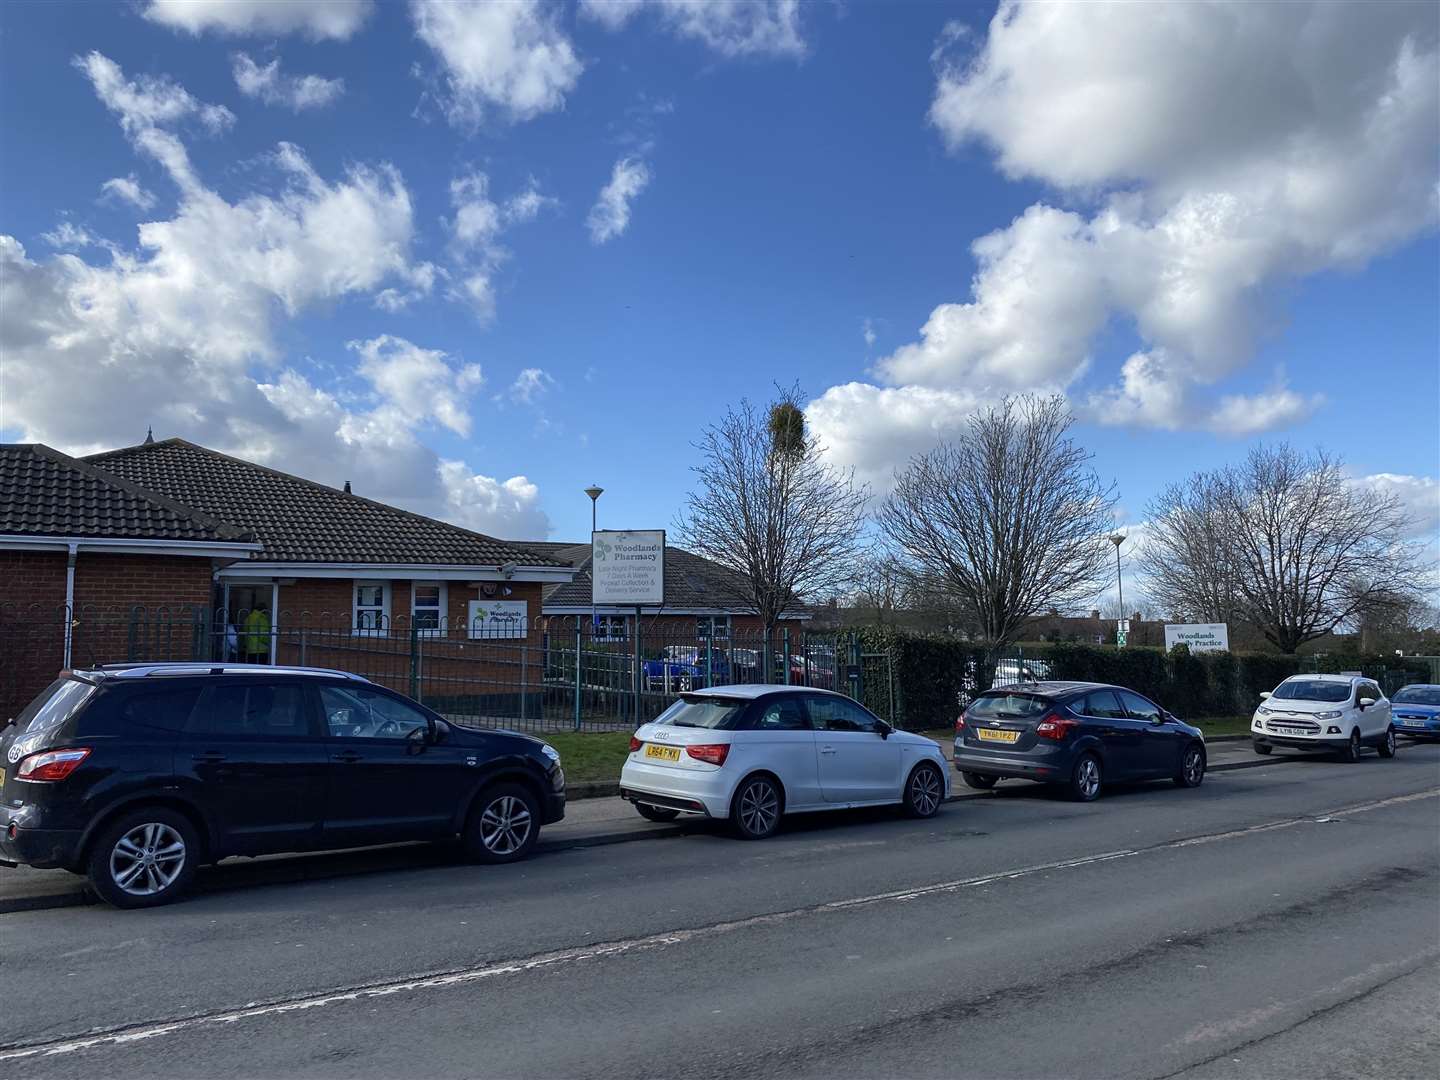 Woodlands Family Practice in Woodlands Road, Gillingham where Dr Conor O'Loughlin worked